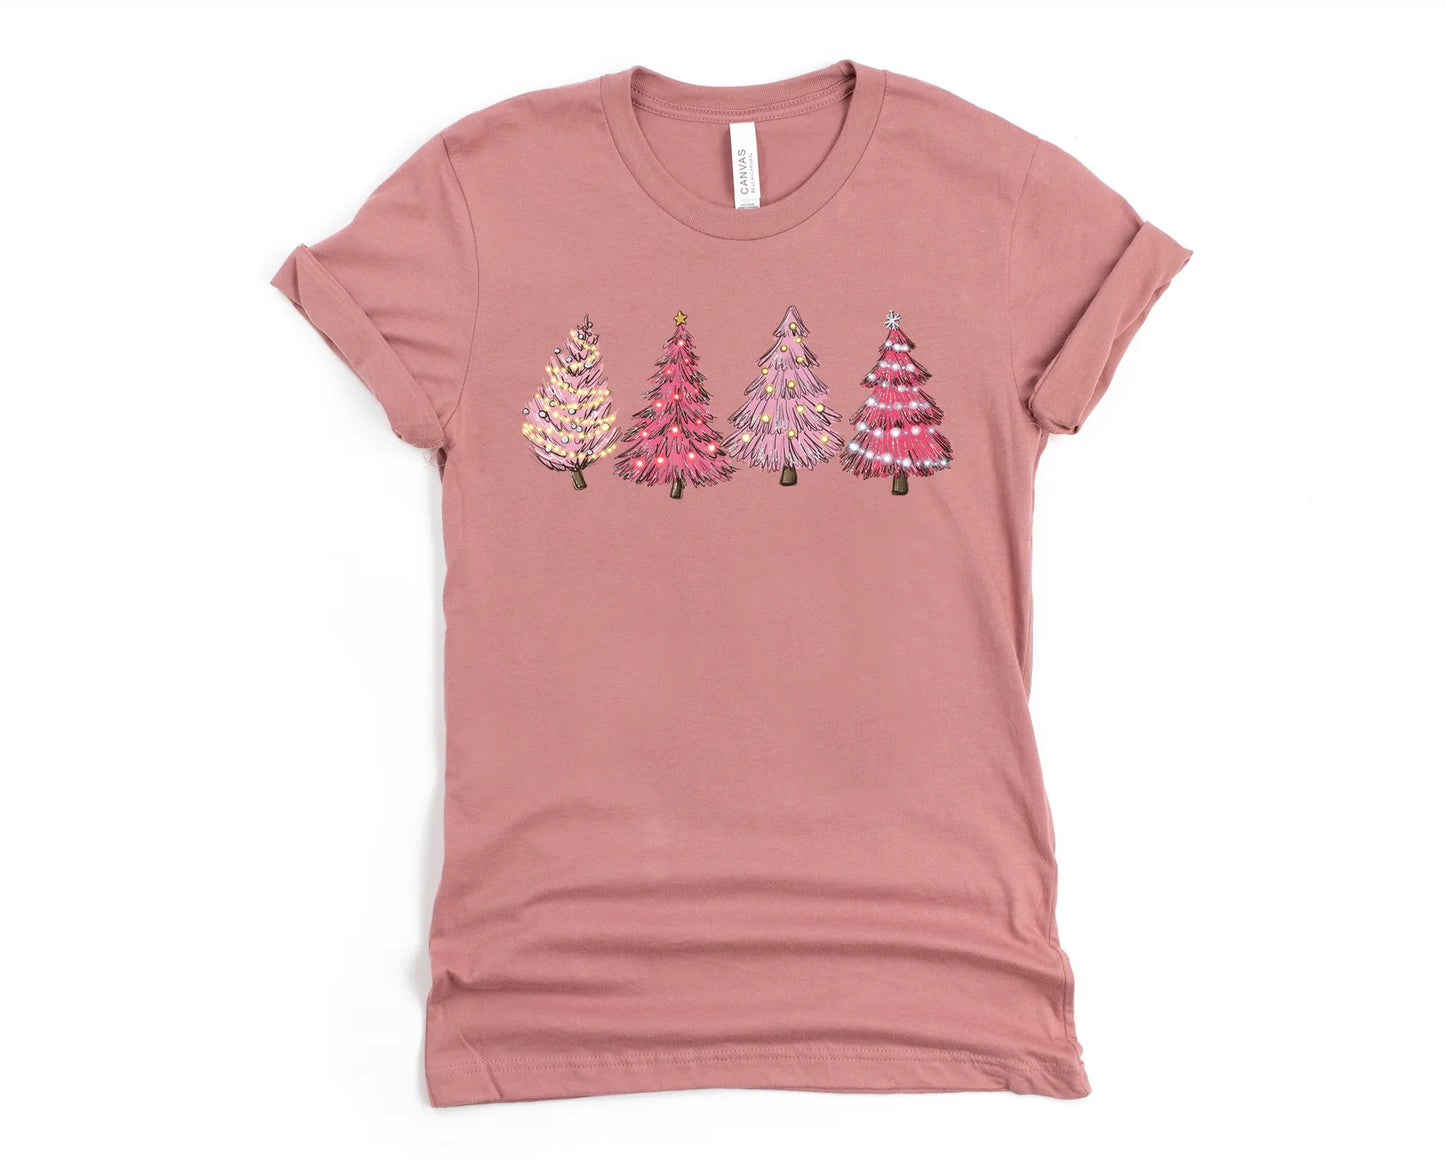 Pink Christmas Trees Graphic Tee - 2 colors